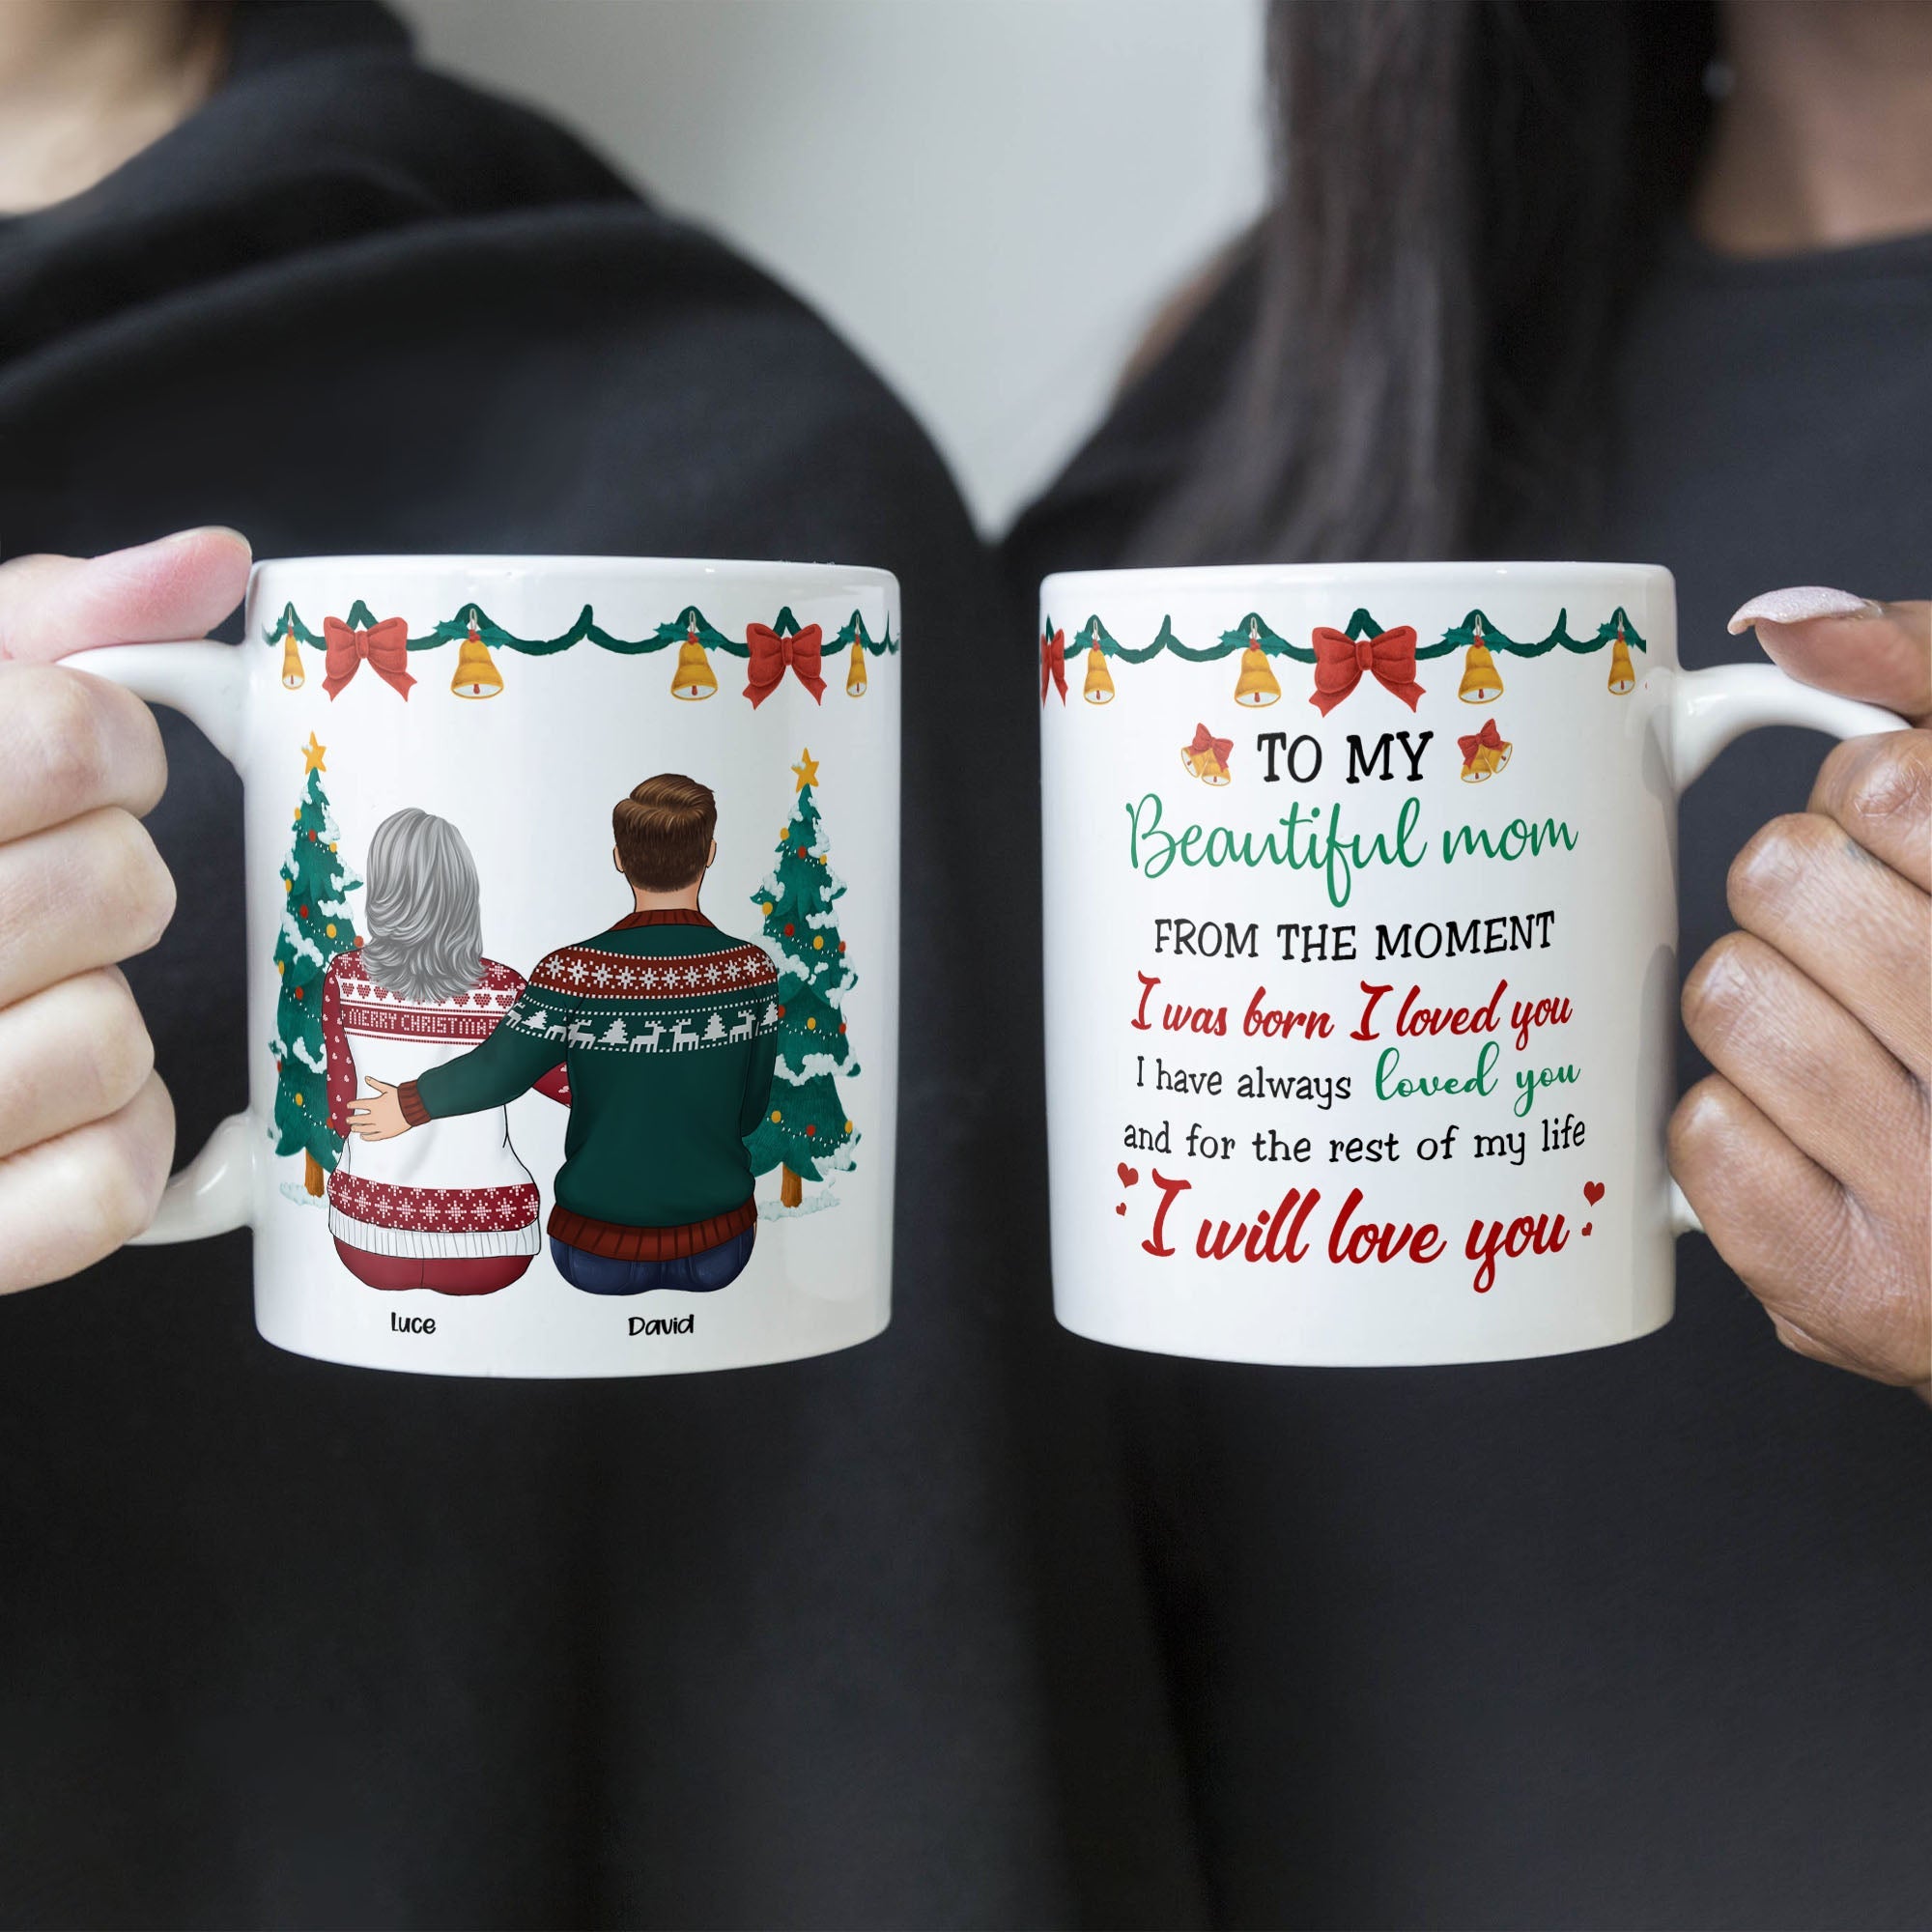 From The Moment I Was Born I Loved You - Personalized Mug - Christmas Gift For Mom, Mother